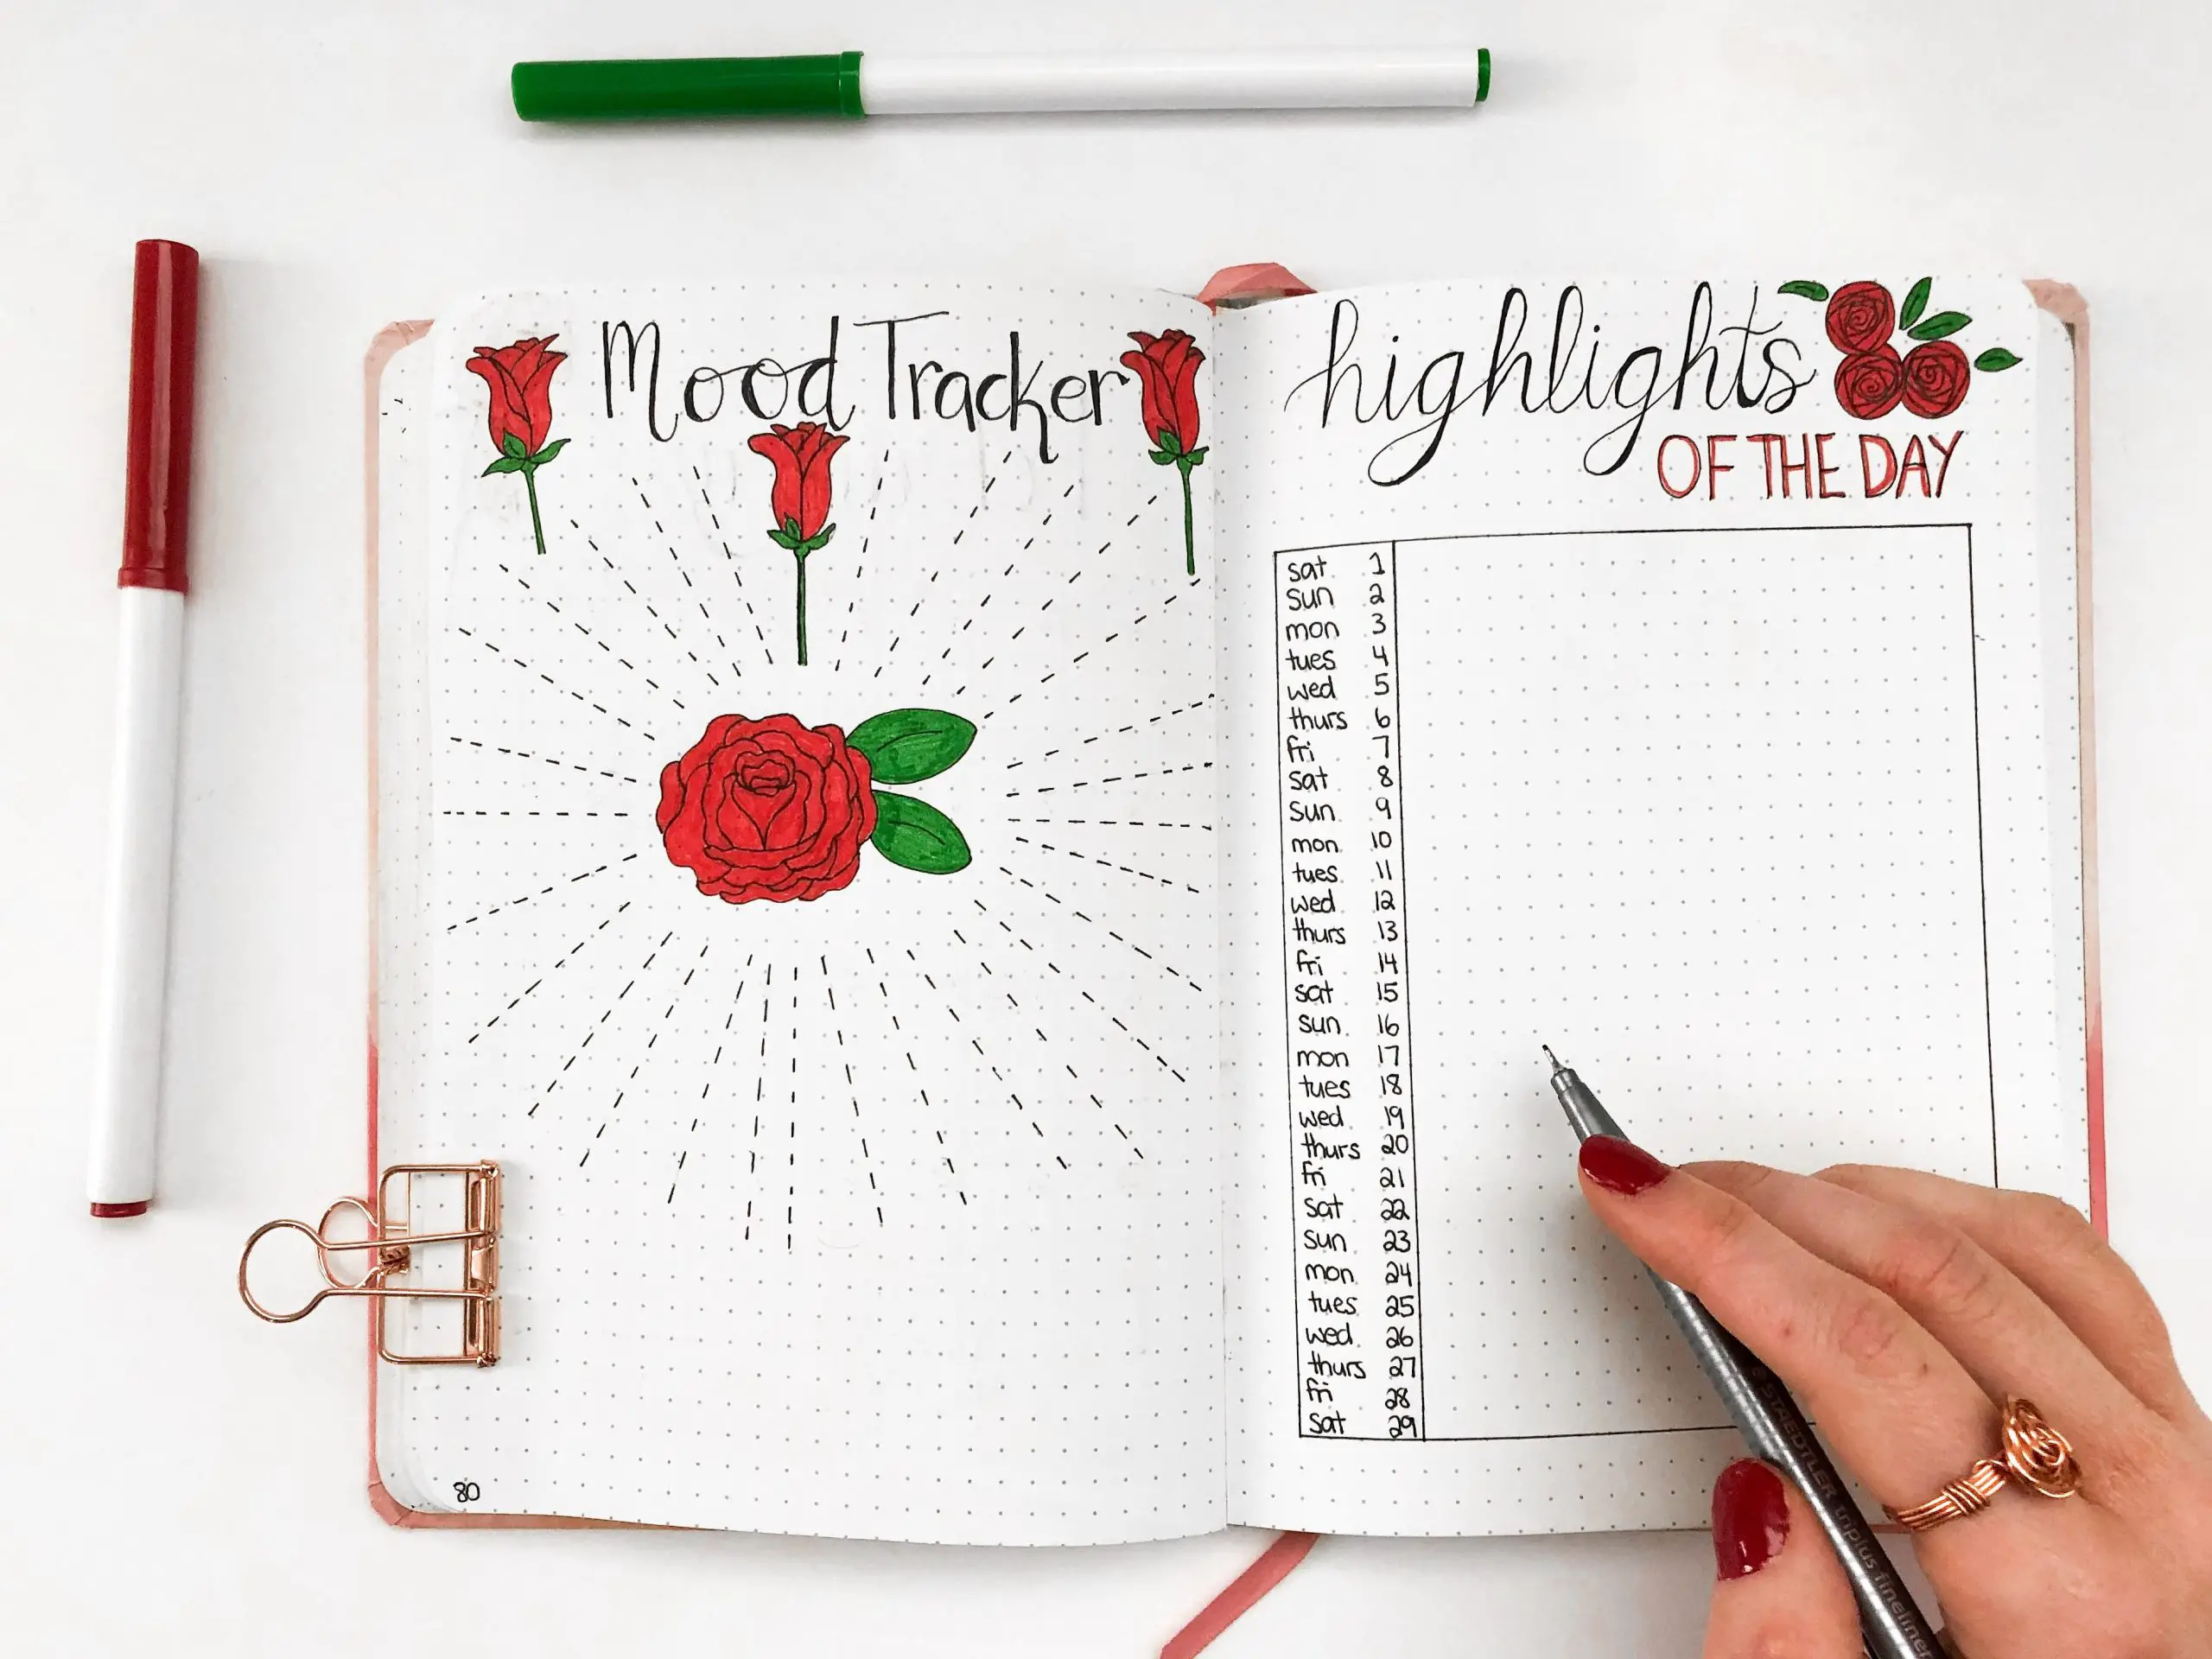 Optimal vrede shilling Monthly bullet journal mood tracker and highlights of the day spread -  Andrea Peacock